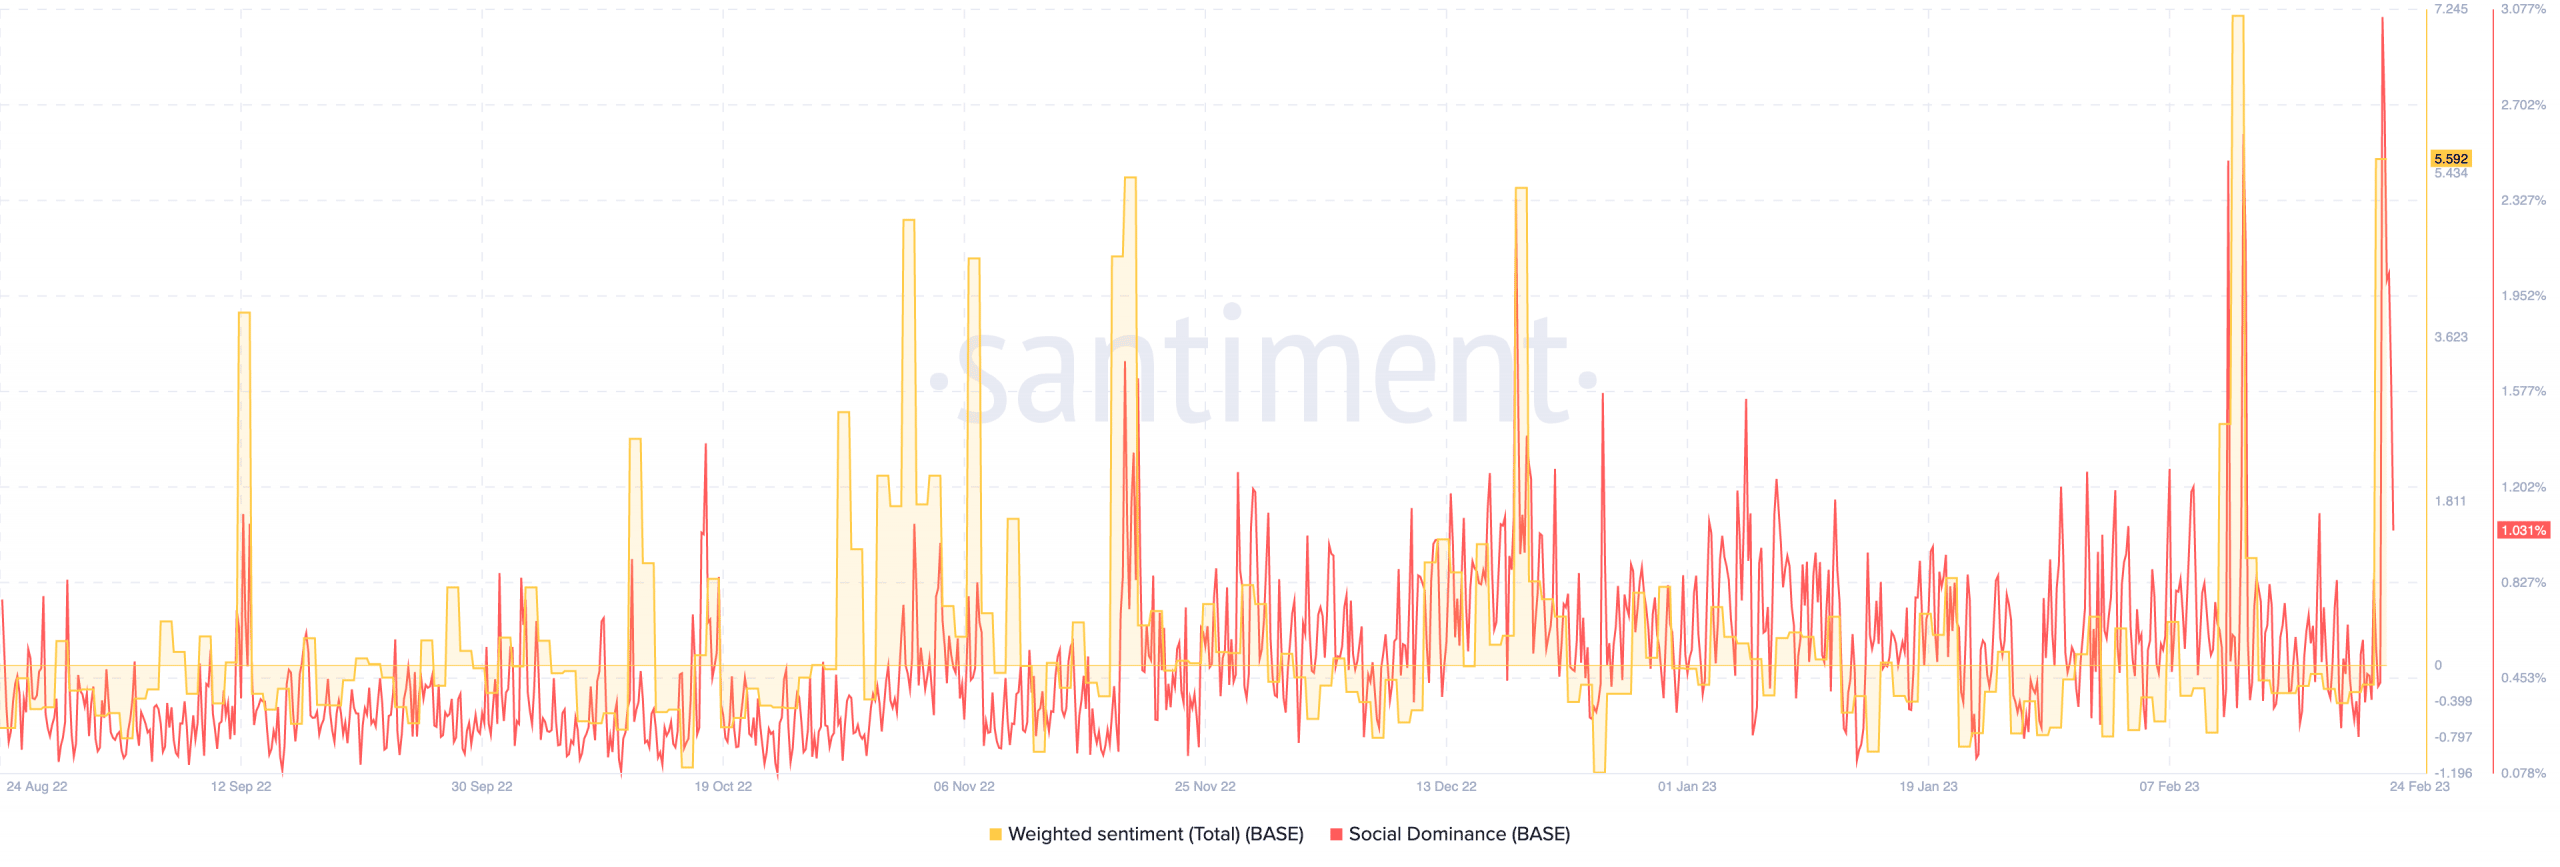 Base Protocol social volume and weighted sentiment